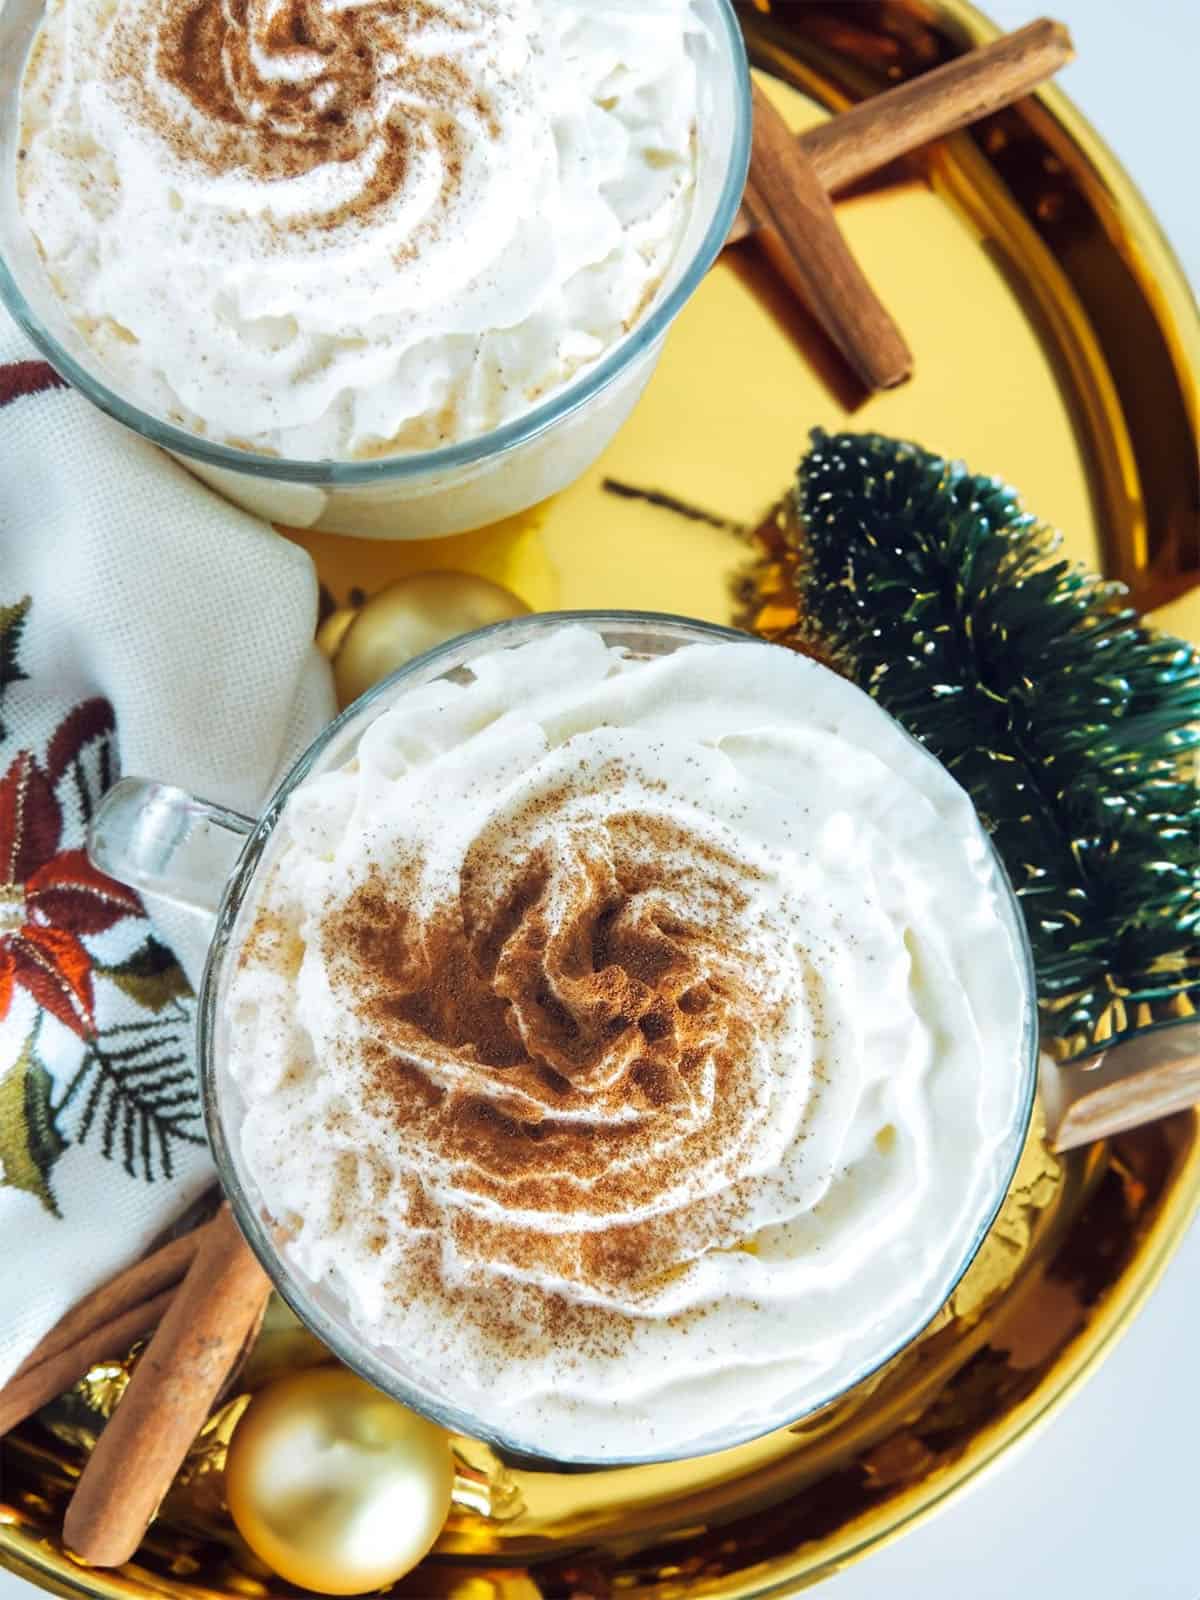 Two eggnog with baileys drinks with whipped cream and cinnamon on top. There is a tiny christmas tree on the right and a festive napkin on the left.